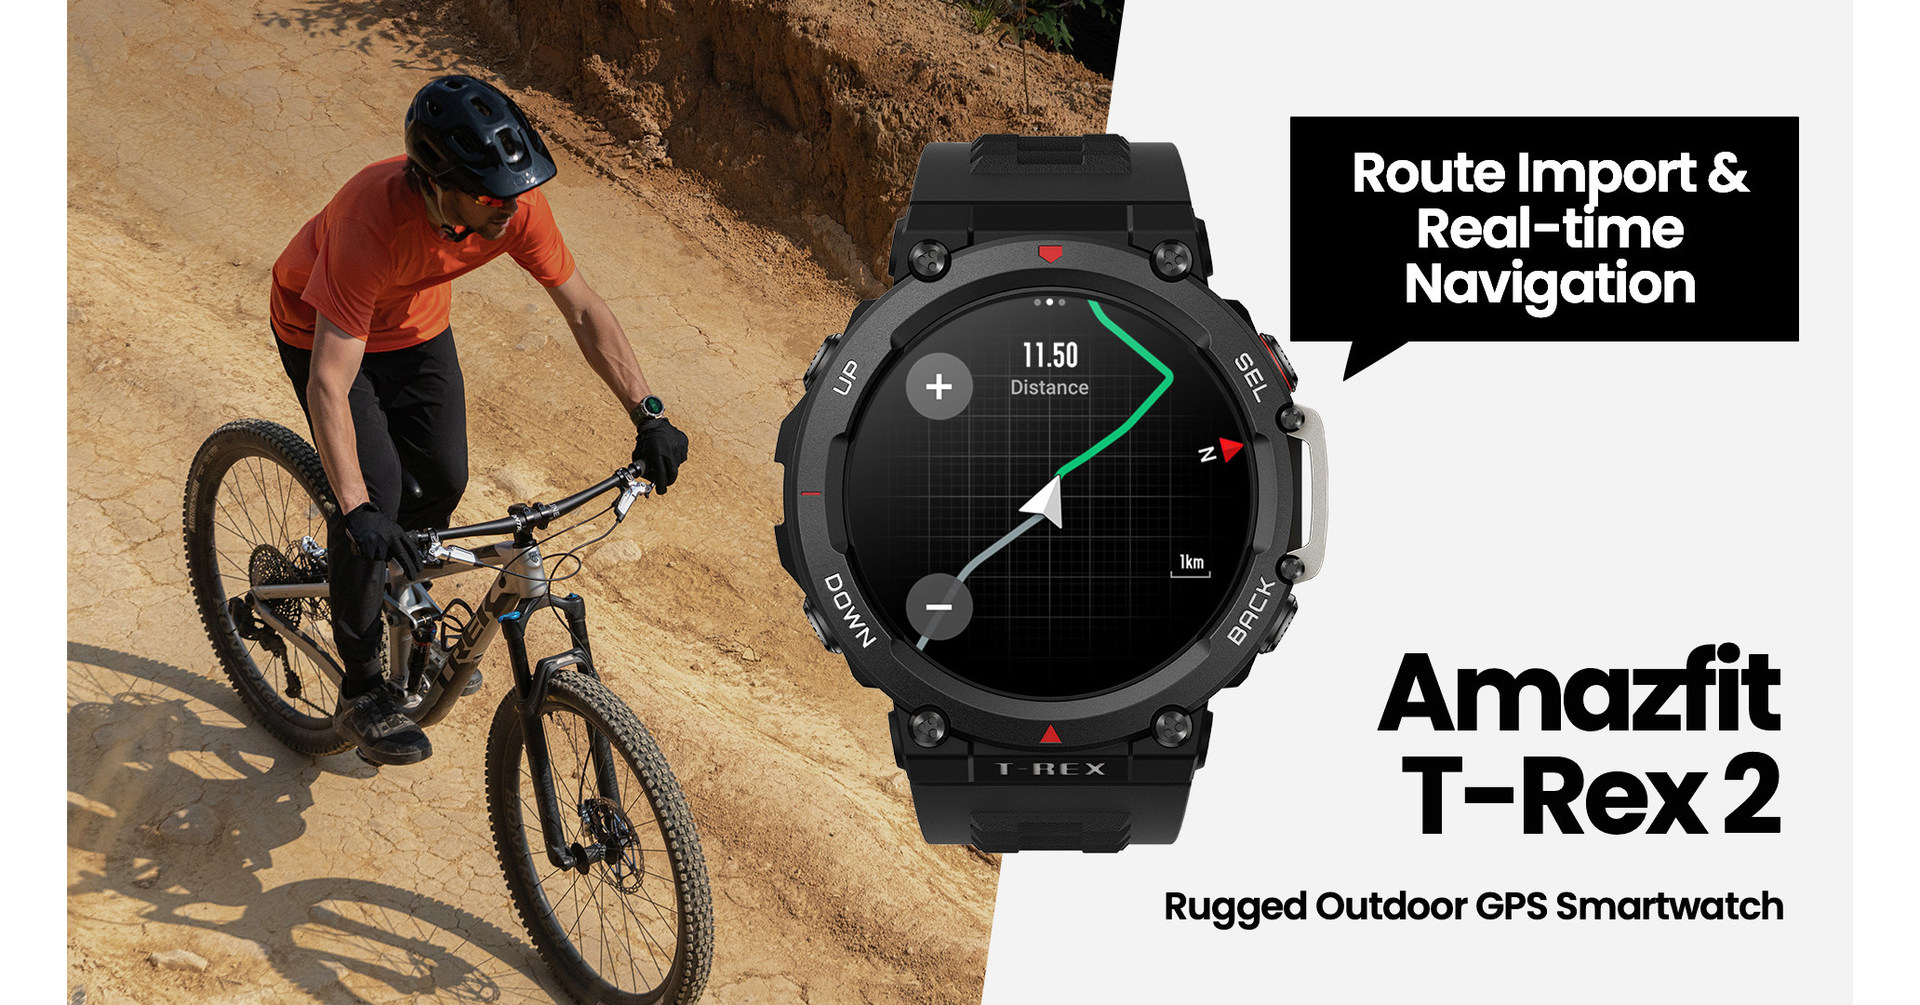 LATEST AMAZFIT T-REX 2 UPDATE INTRODUCES ROUTE IMPORT & REAL-TIME  NAVIGATION, AND TRAINING TEMPLATES